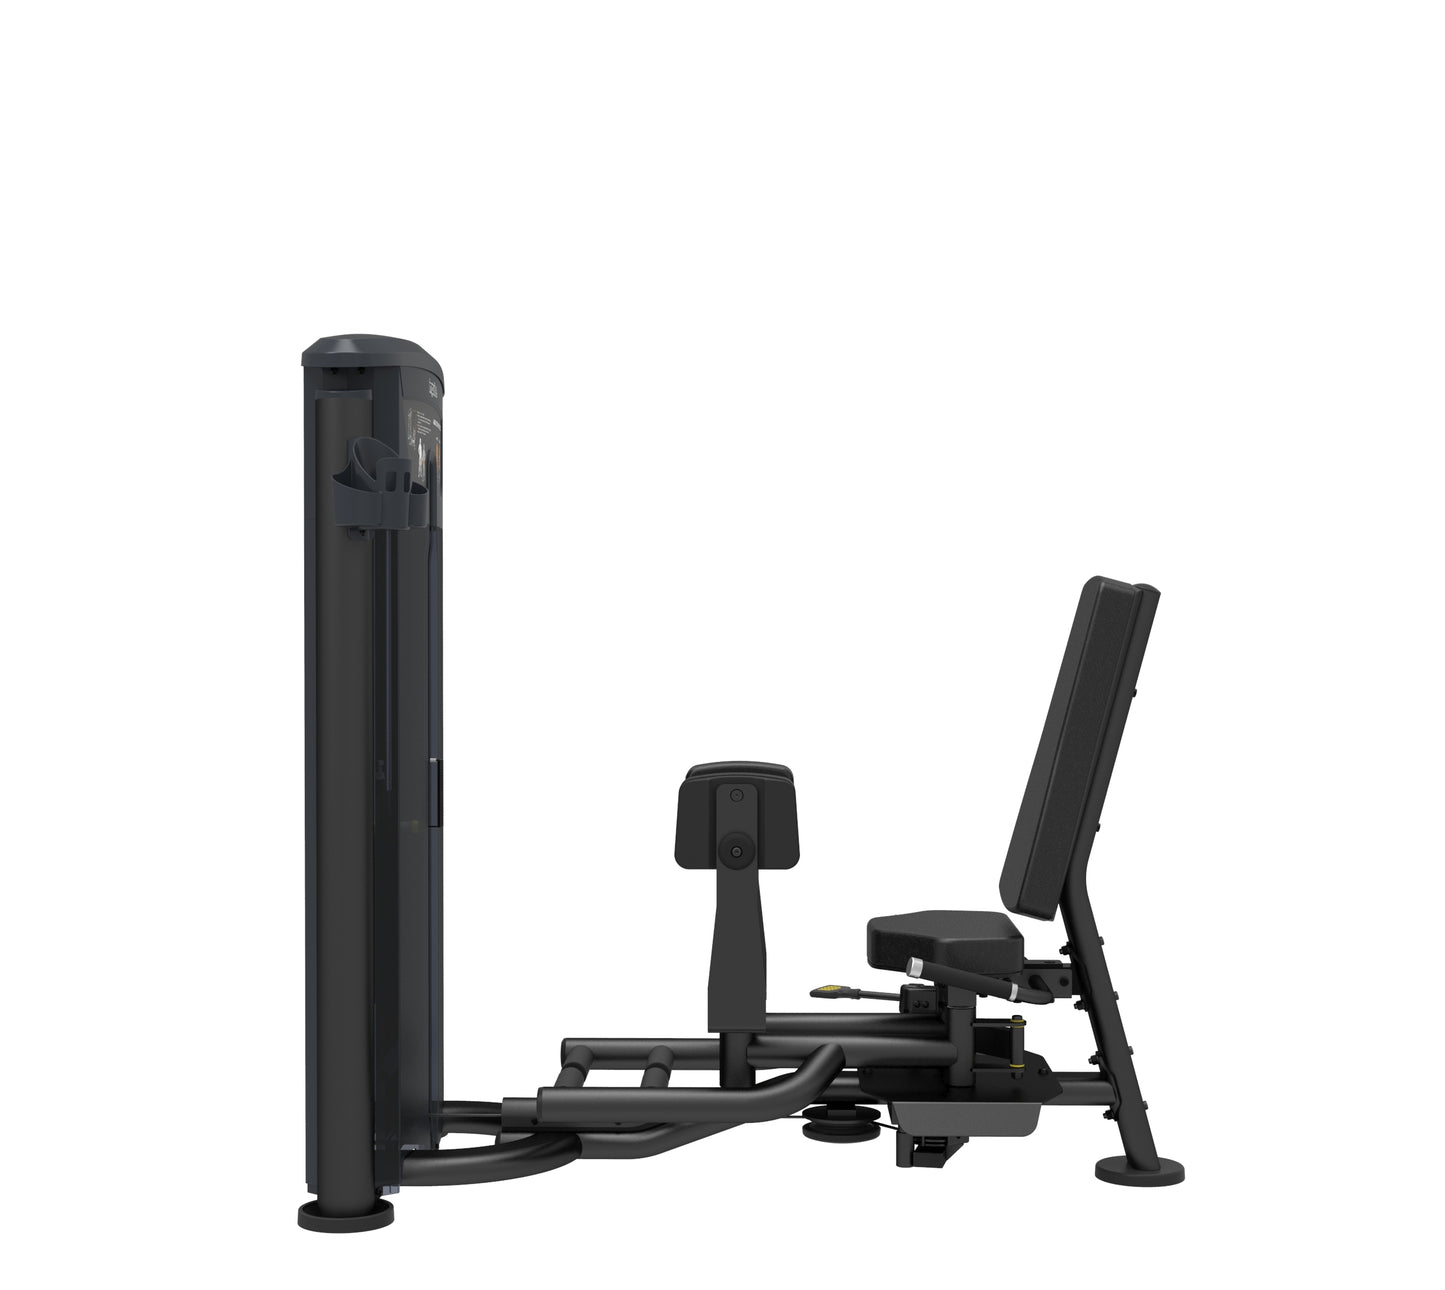 IT9508 IMPULSE ADBUCTOR/ADDUCTOR BLACK SERIES 200LB WEIGHT STACK.